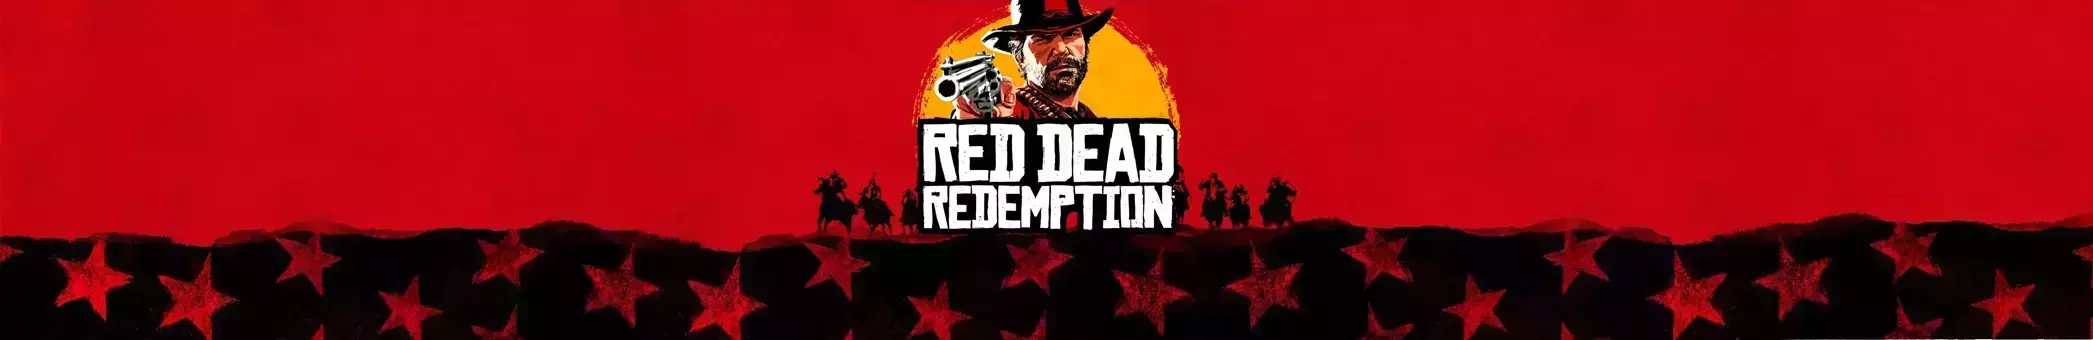 Red Dead Redemption Digital Edition